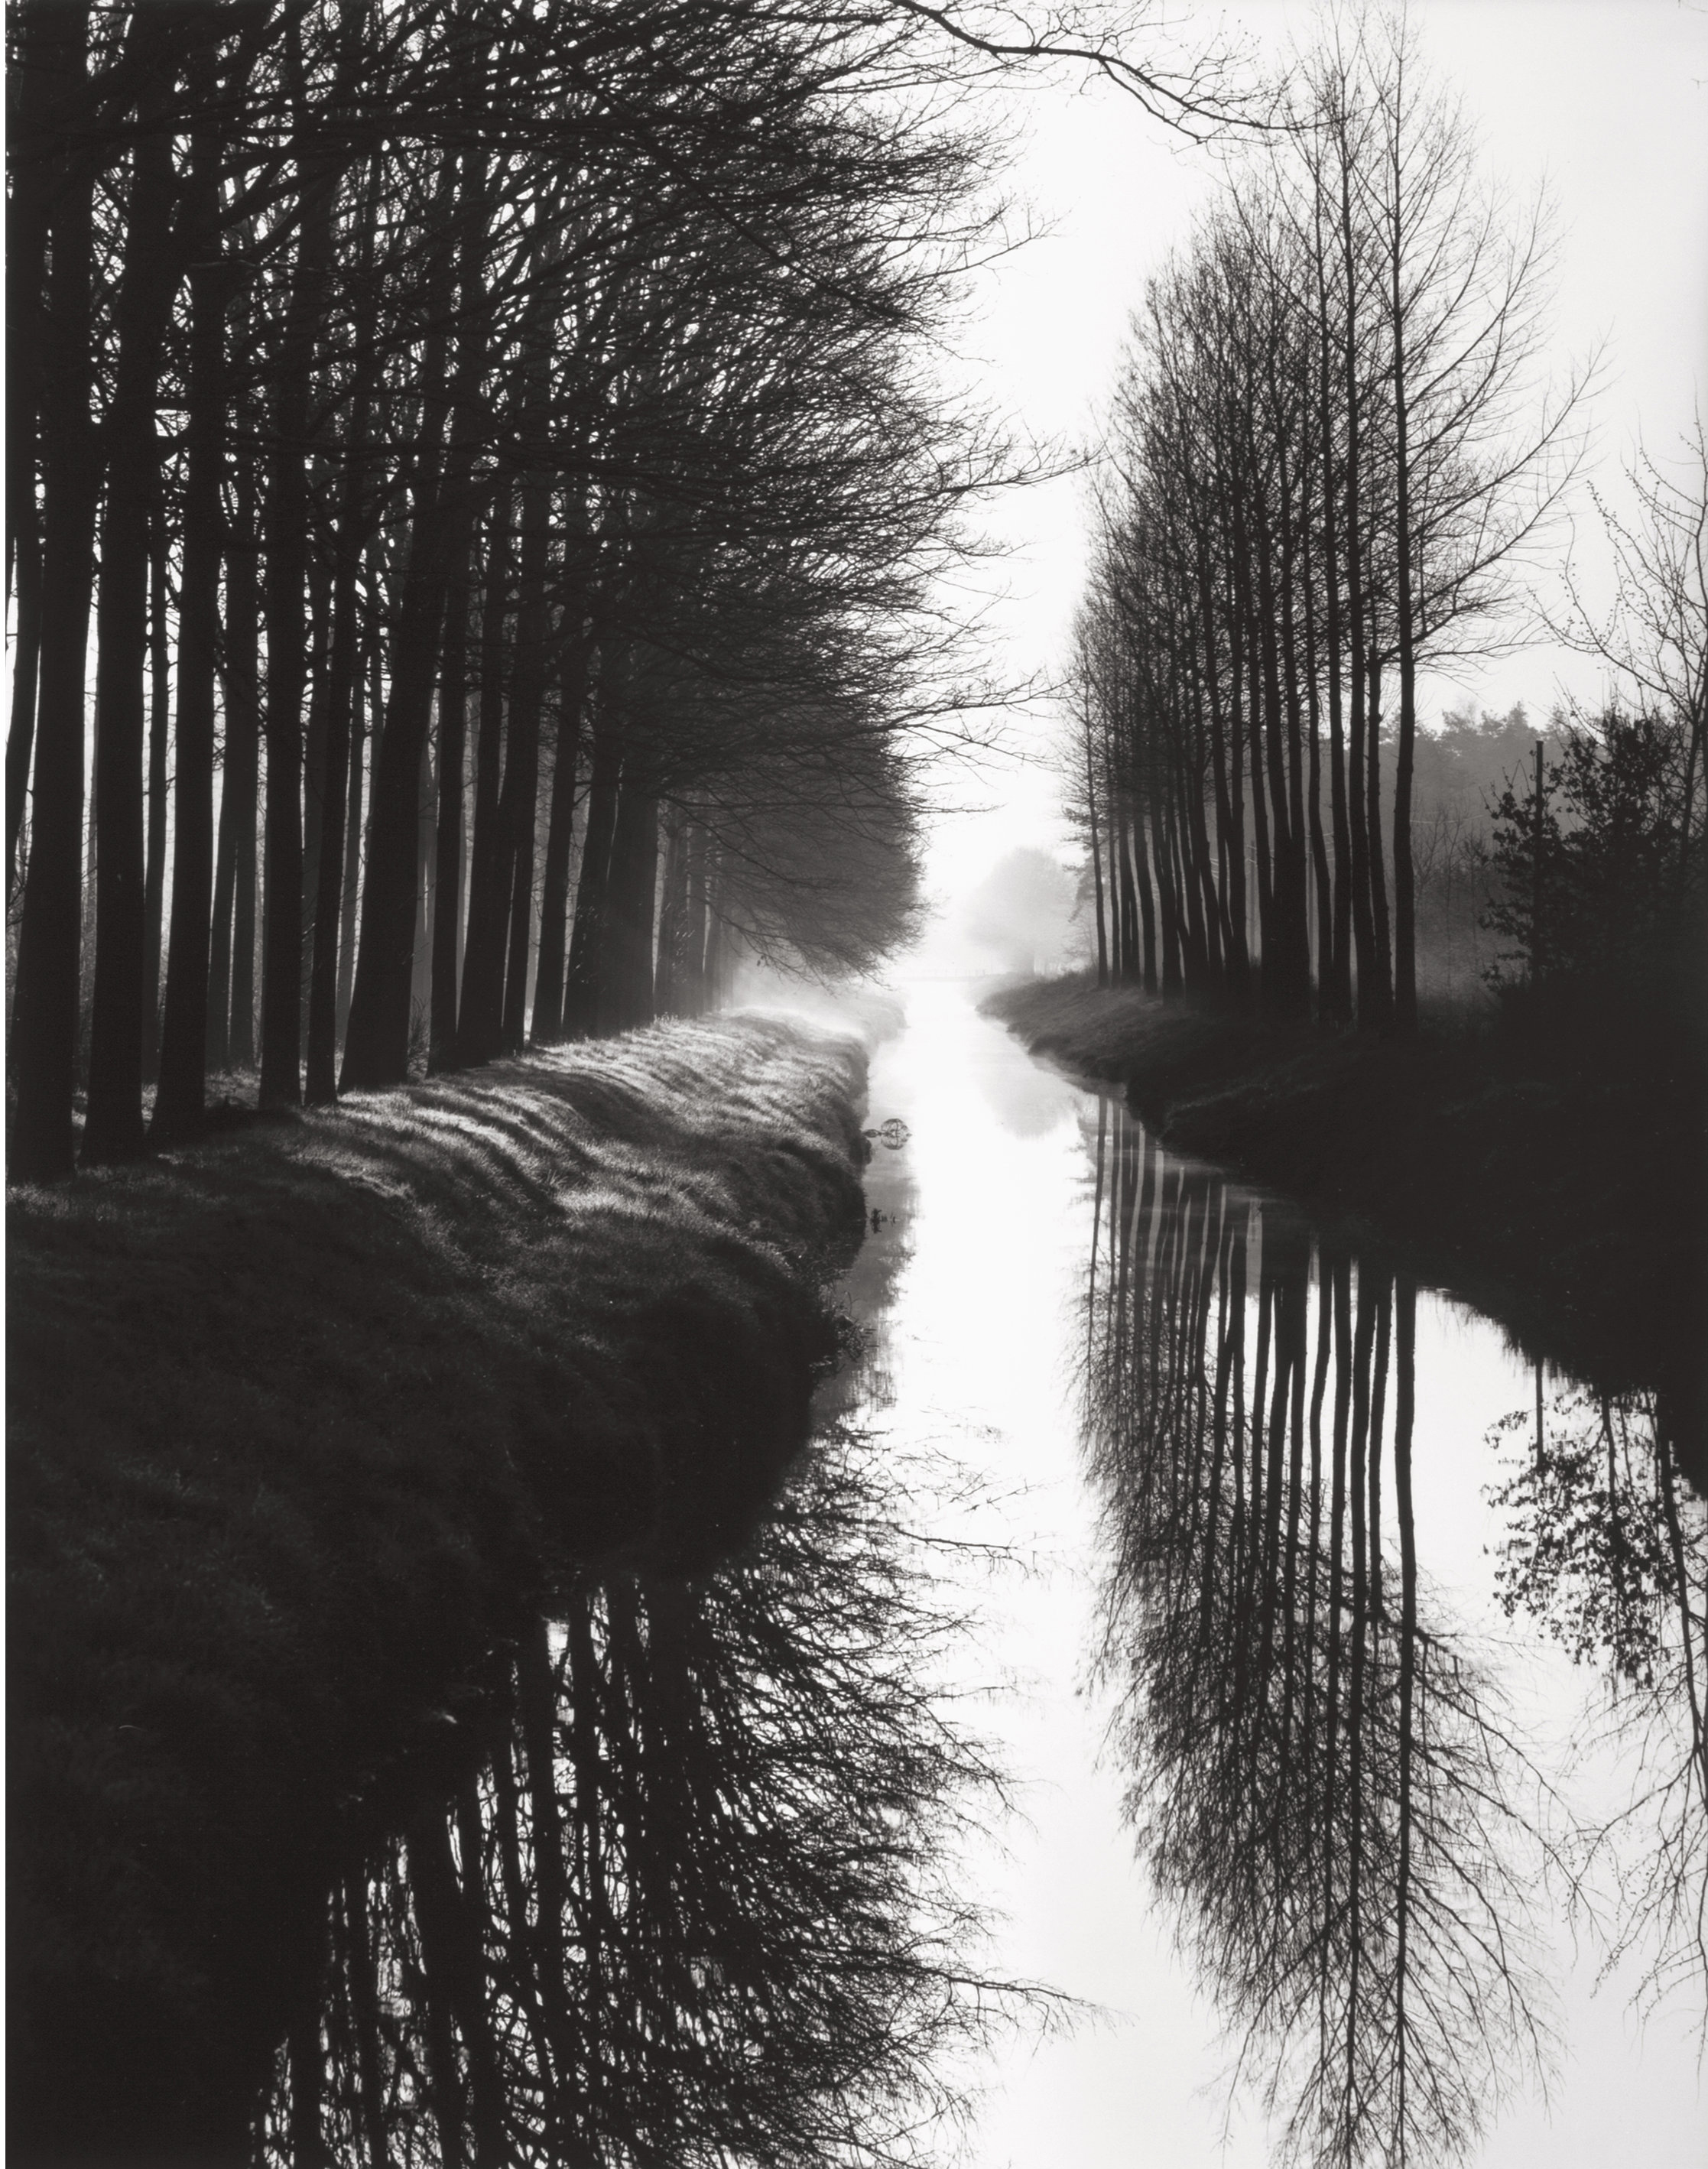 Brett Weston, Holland Canal, 1971, Catherine Couturier Gallery